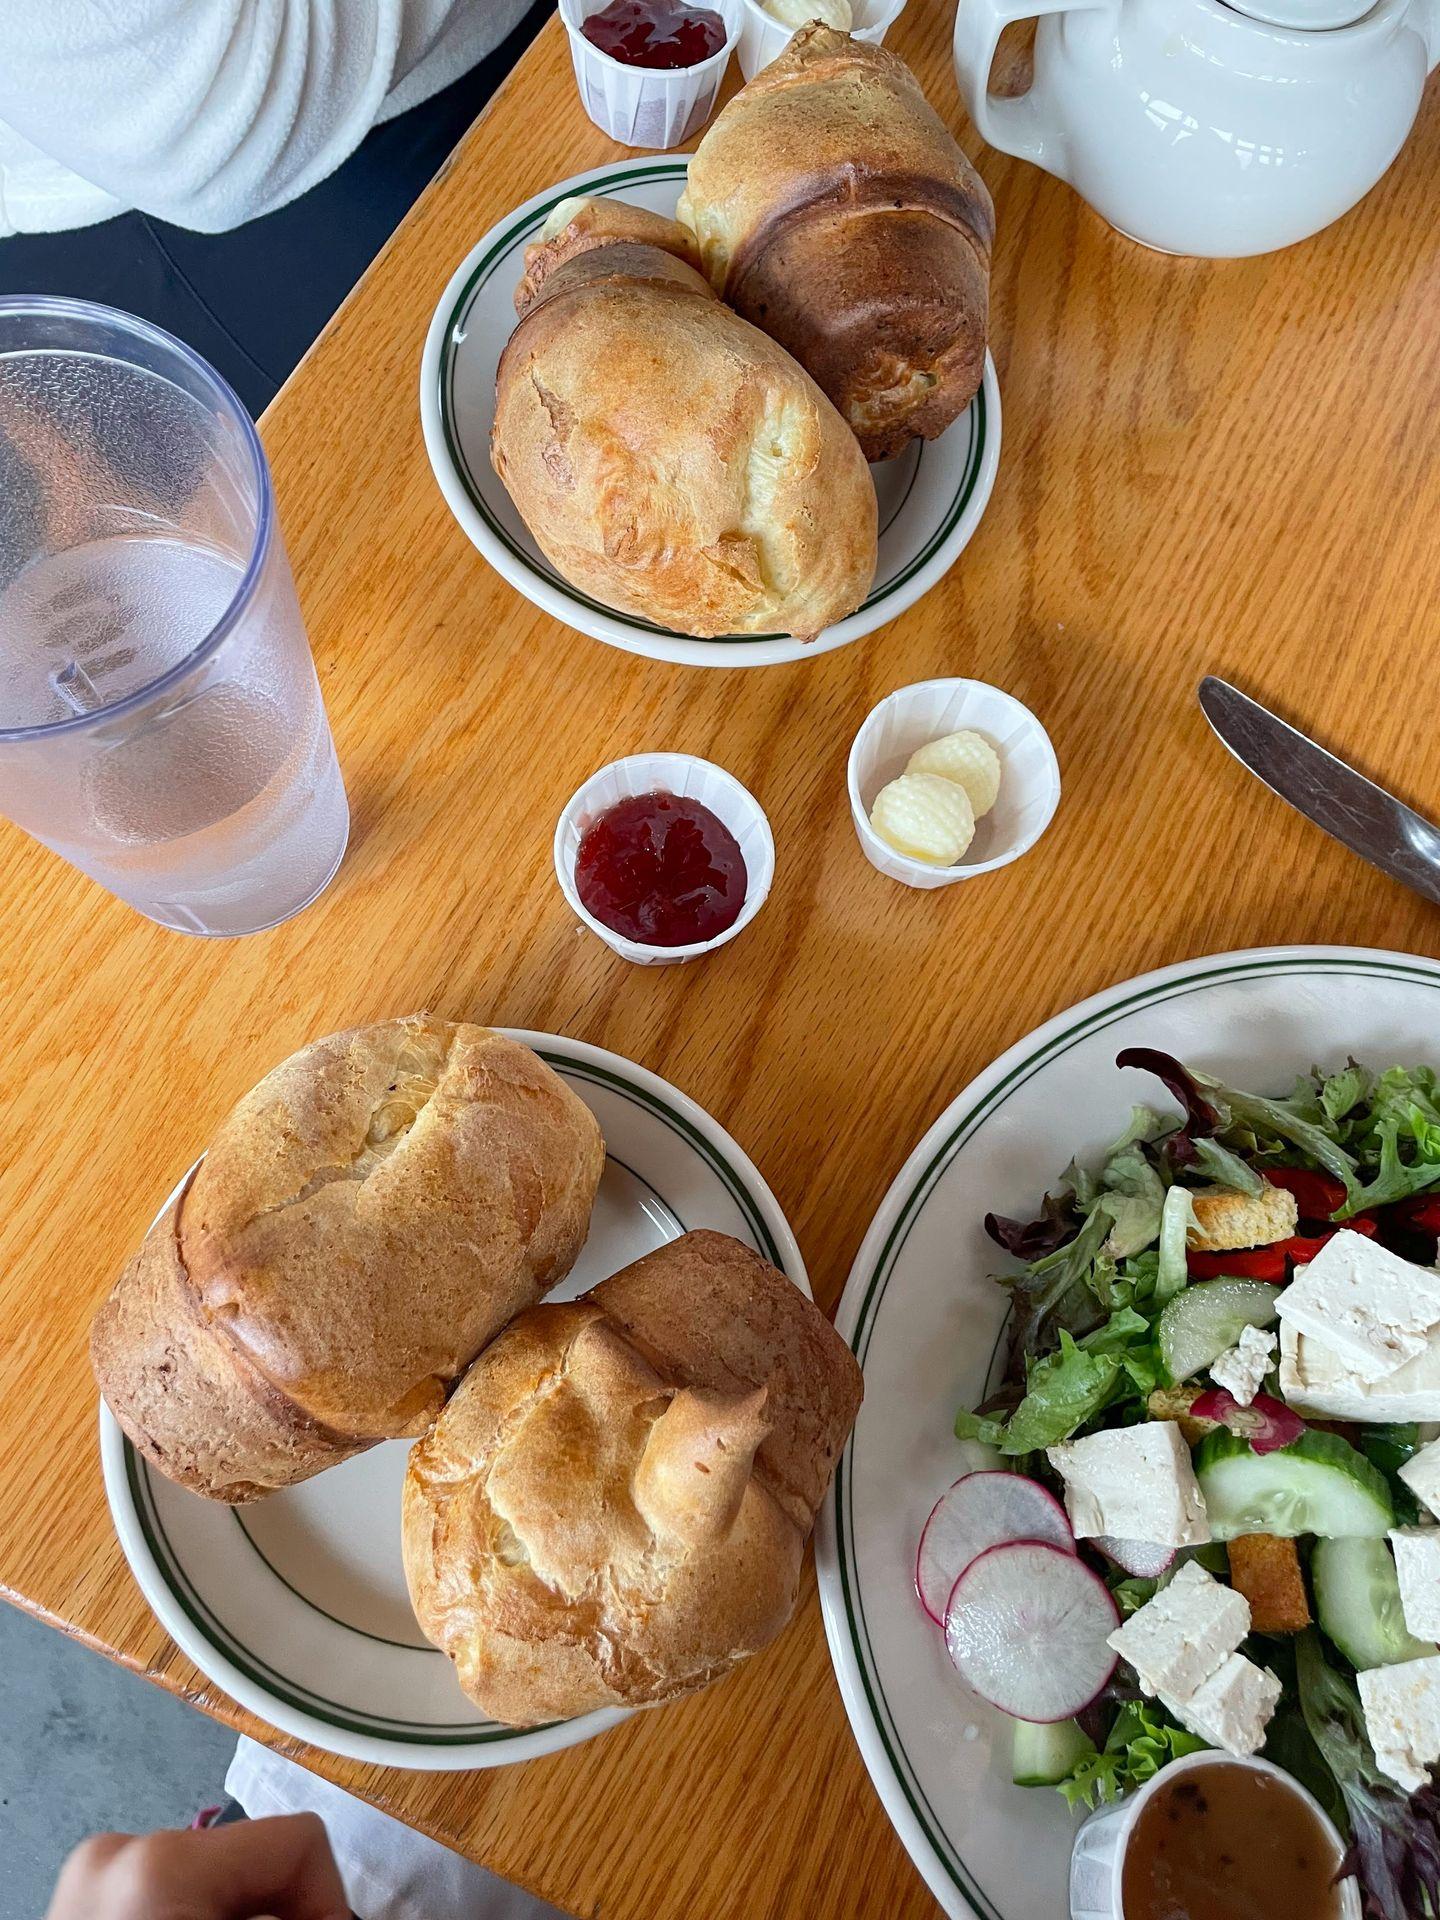 Two plates of popovers and a salad from Jordan Pond House